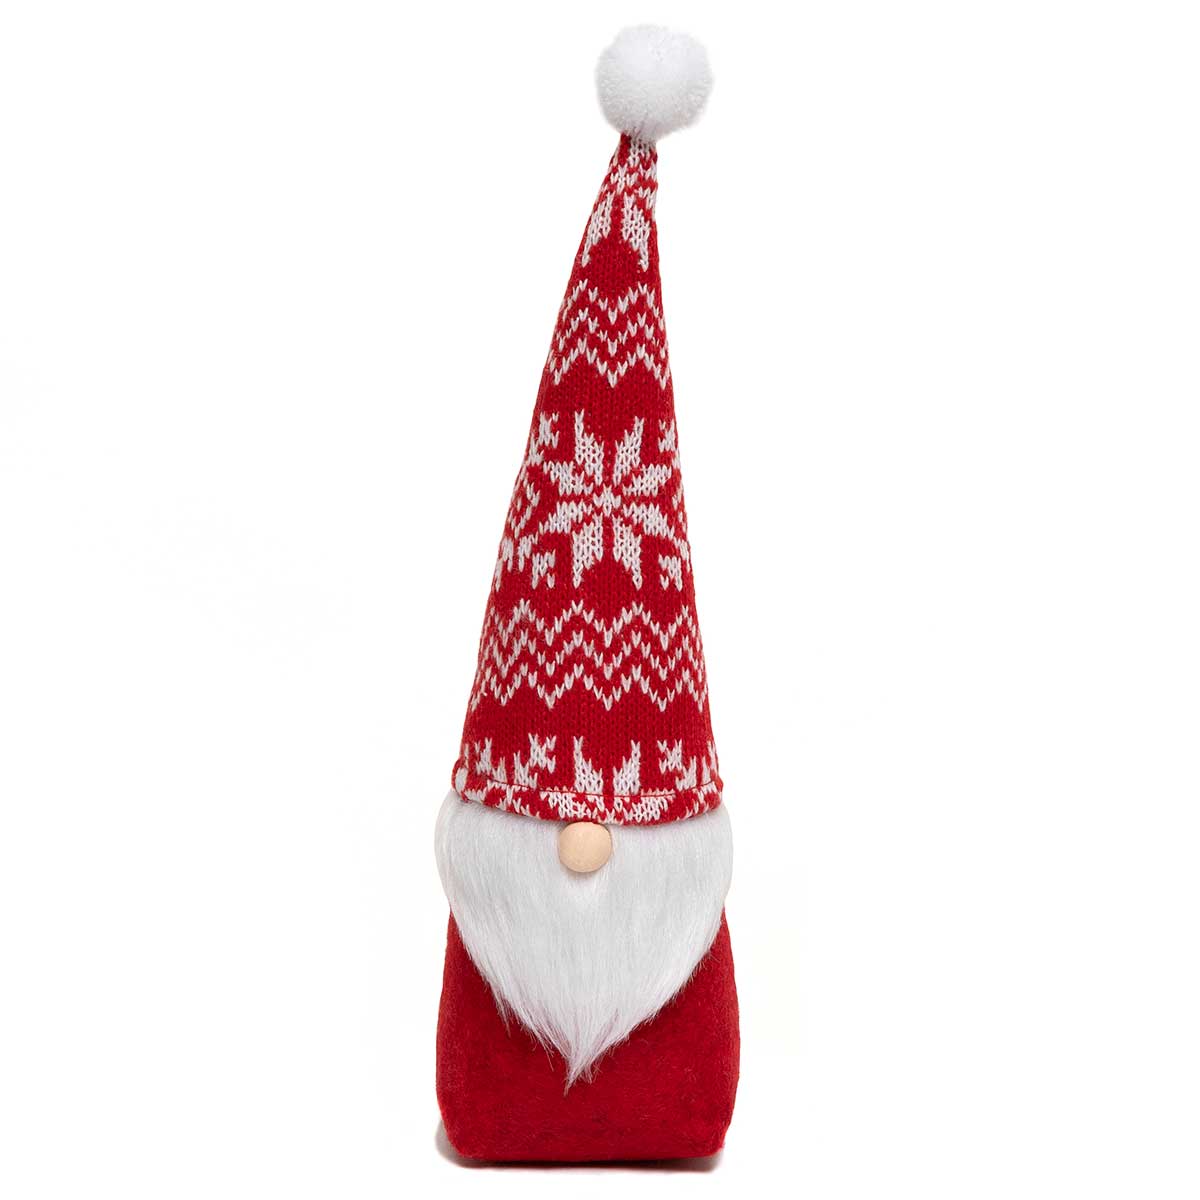 TOMTE HOLIDAY GNOME WITH SWEATER HAT LARGE